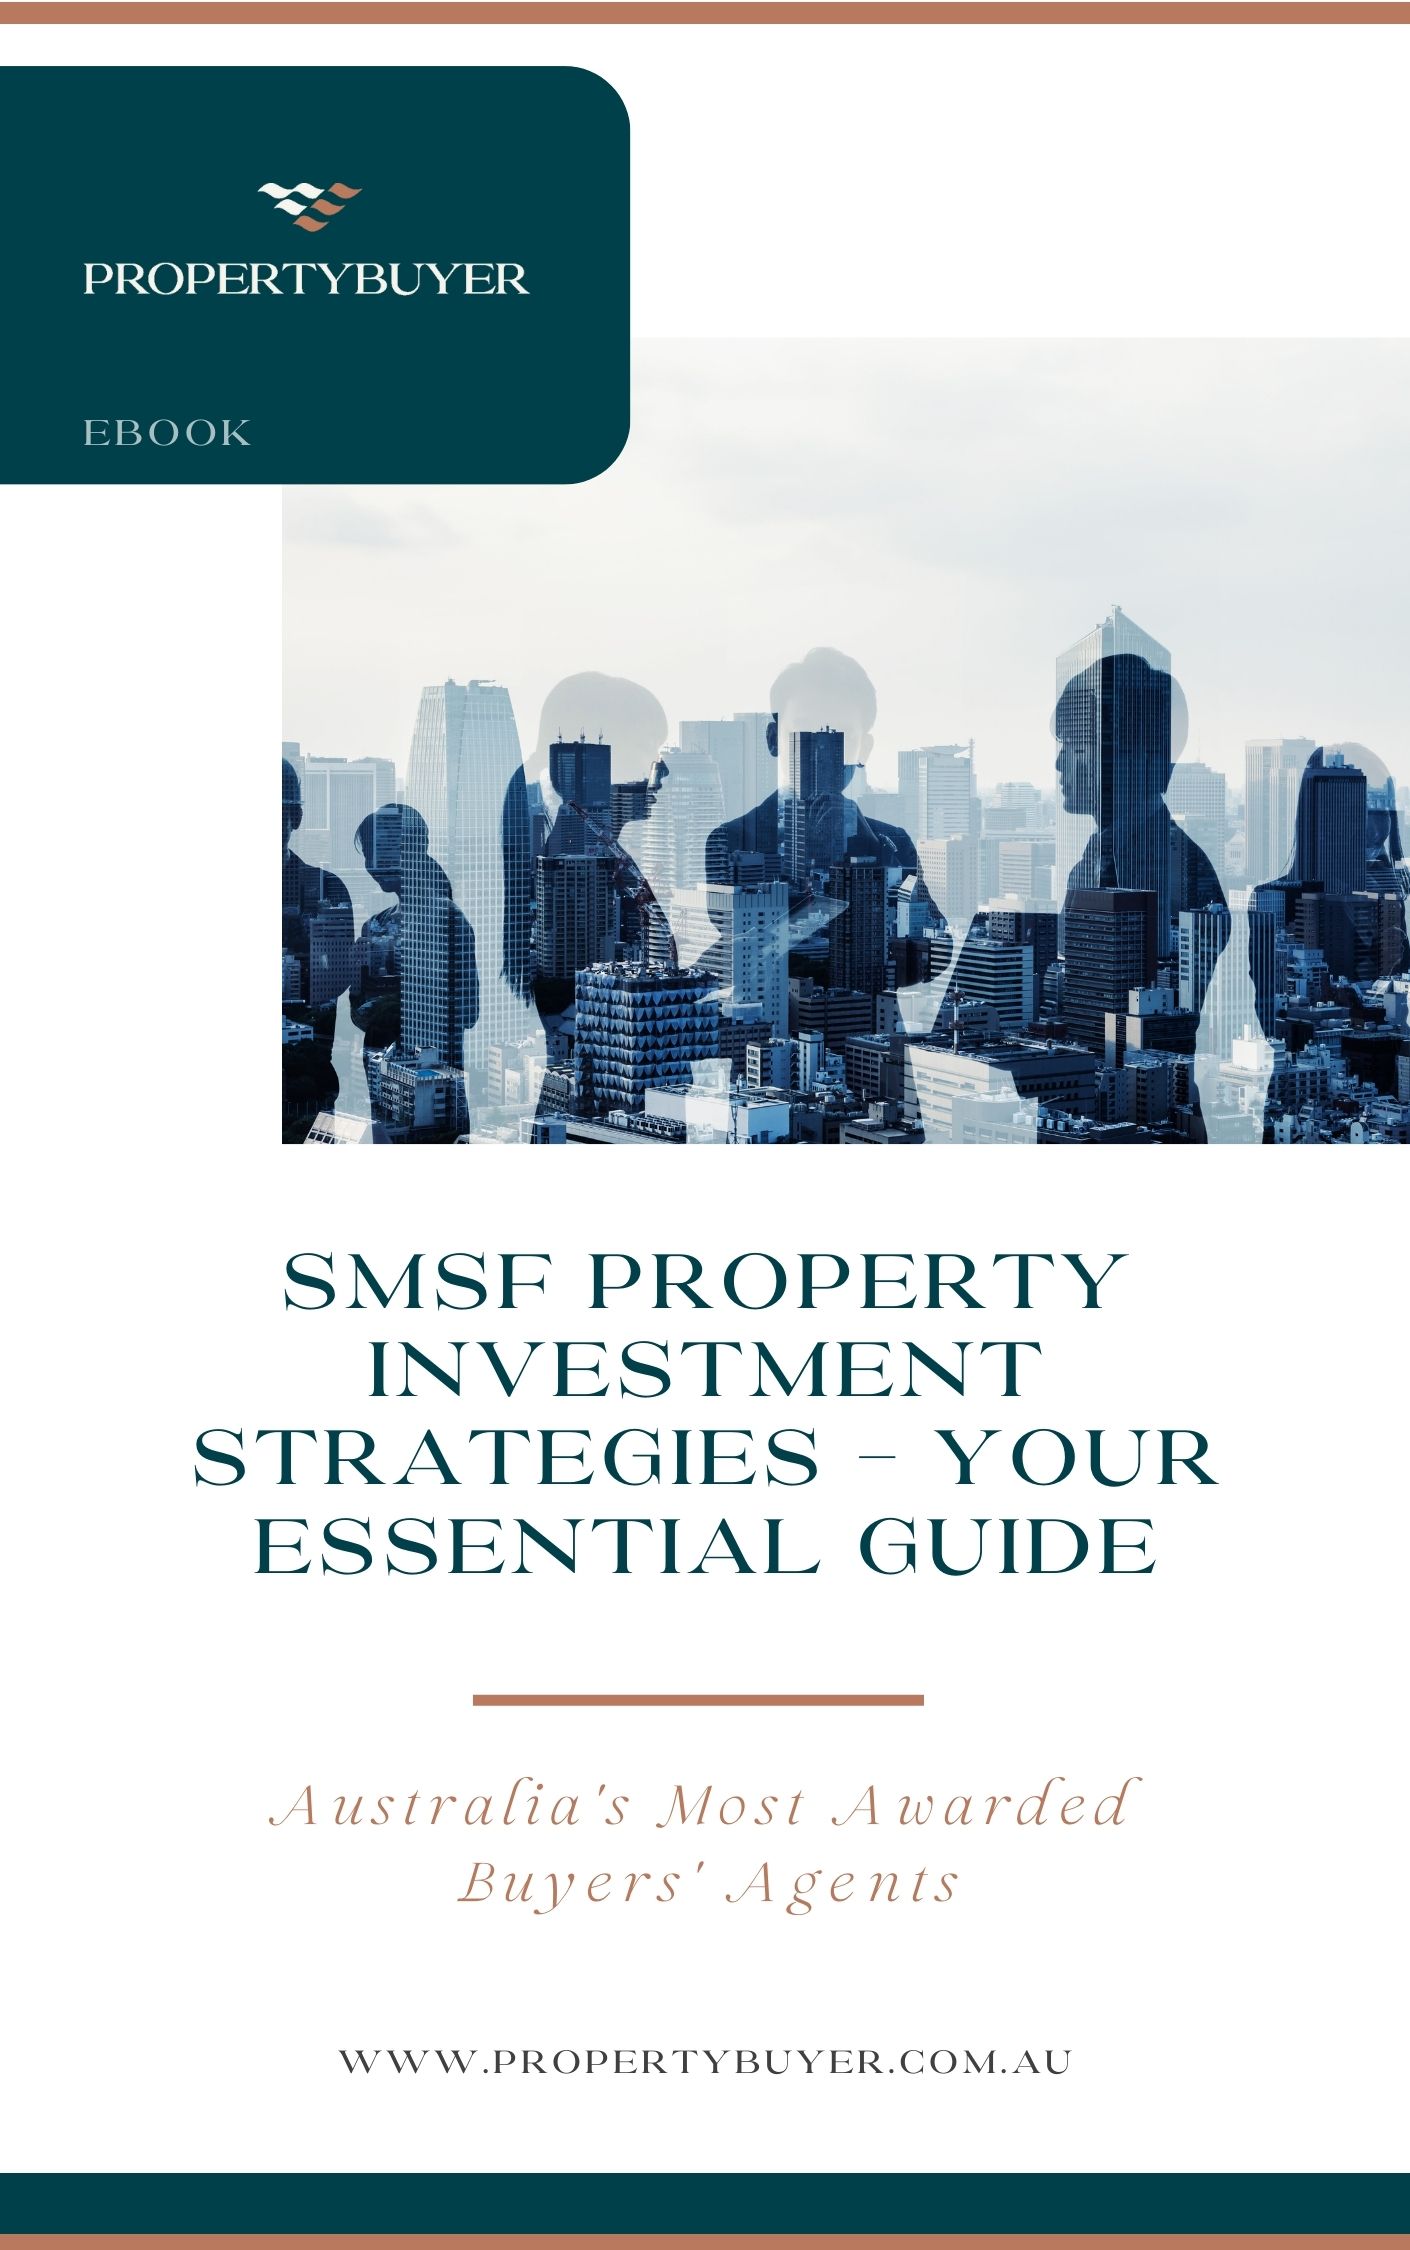 SMSF Property Investment Strategy